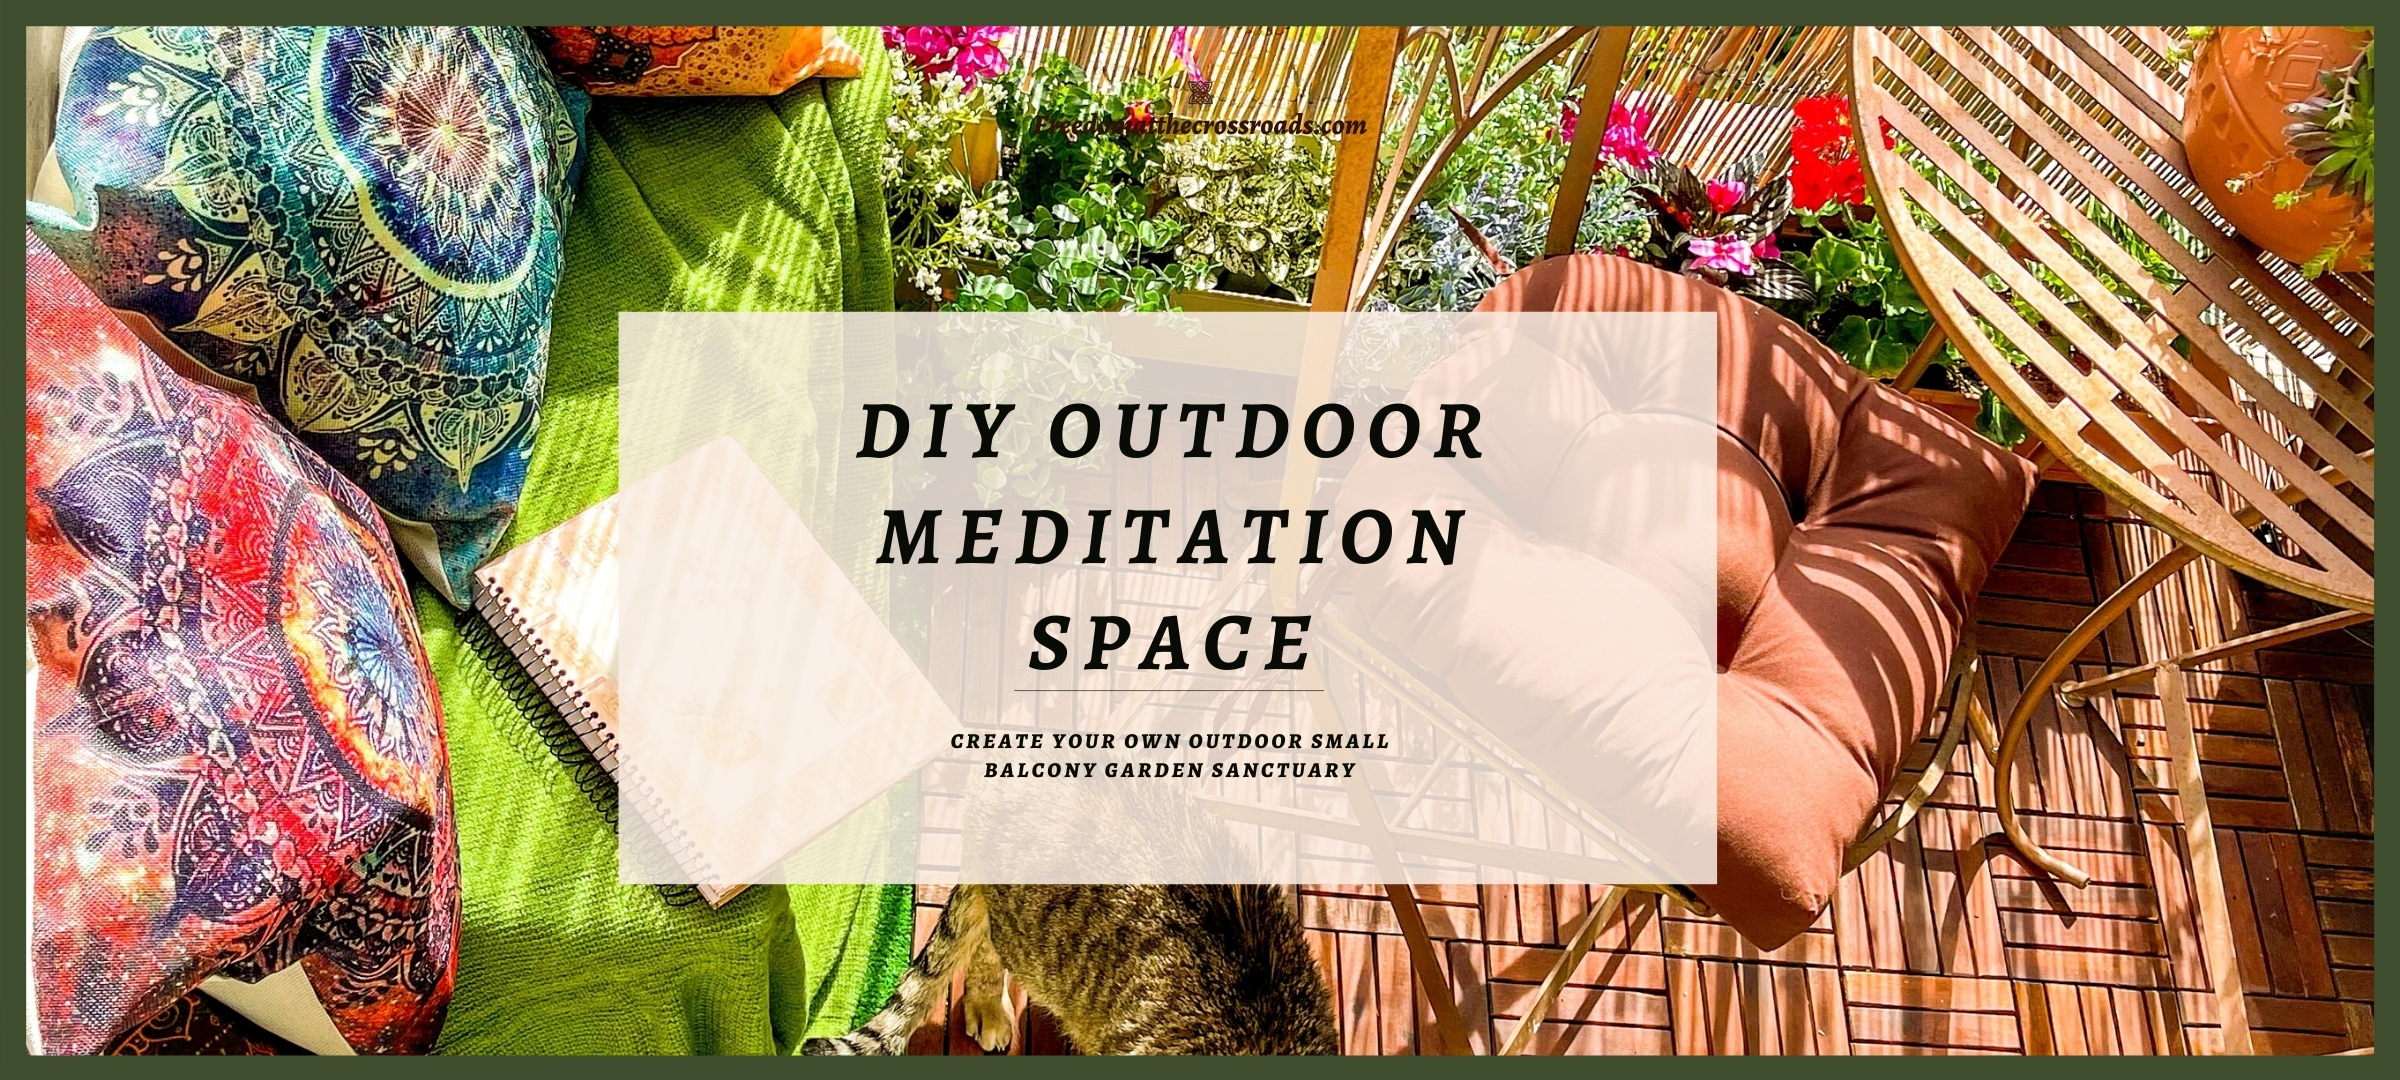 diy outdoor meditation space blog feature image